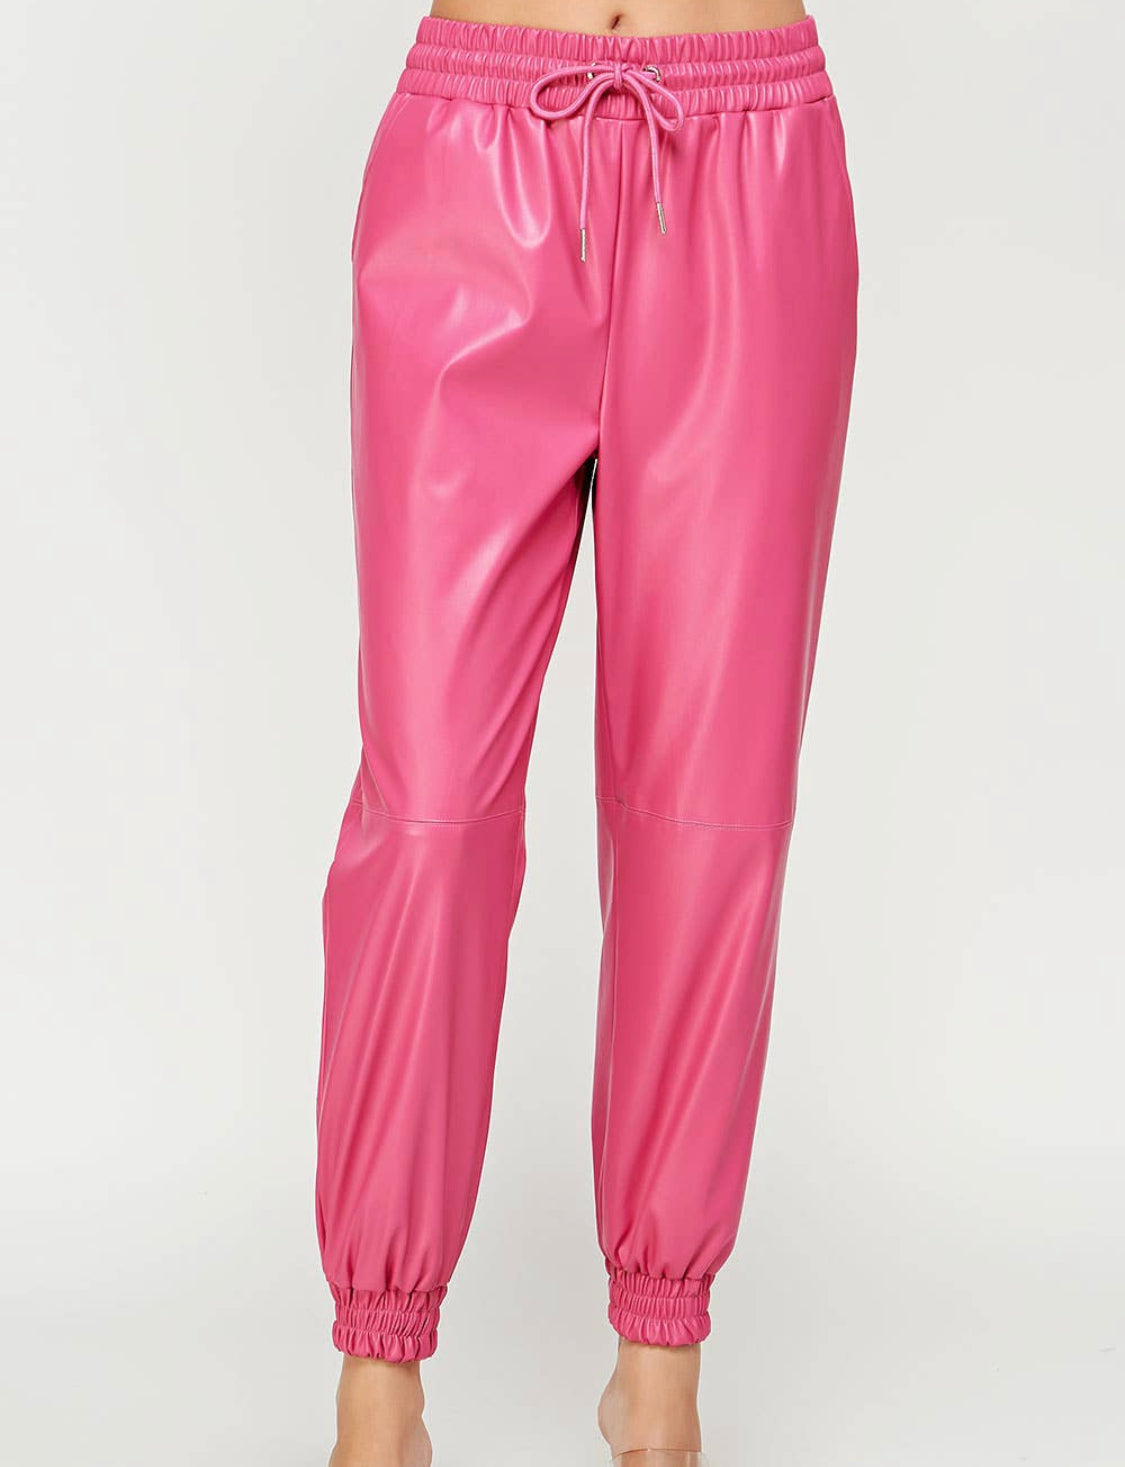 Hot pink faux leather joggers